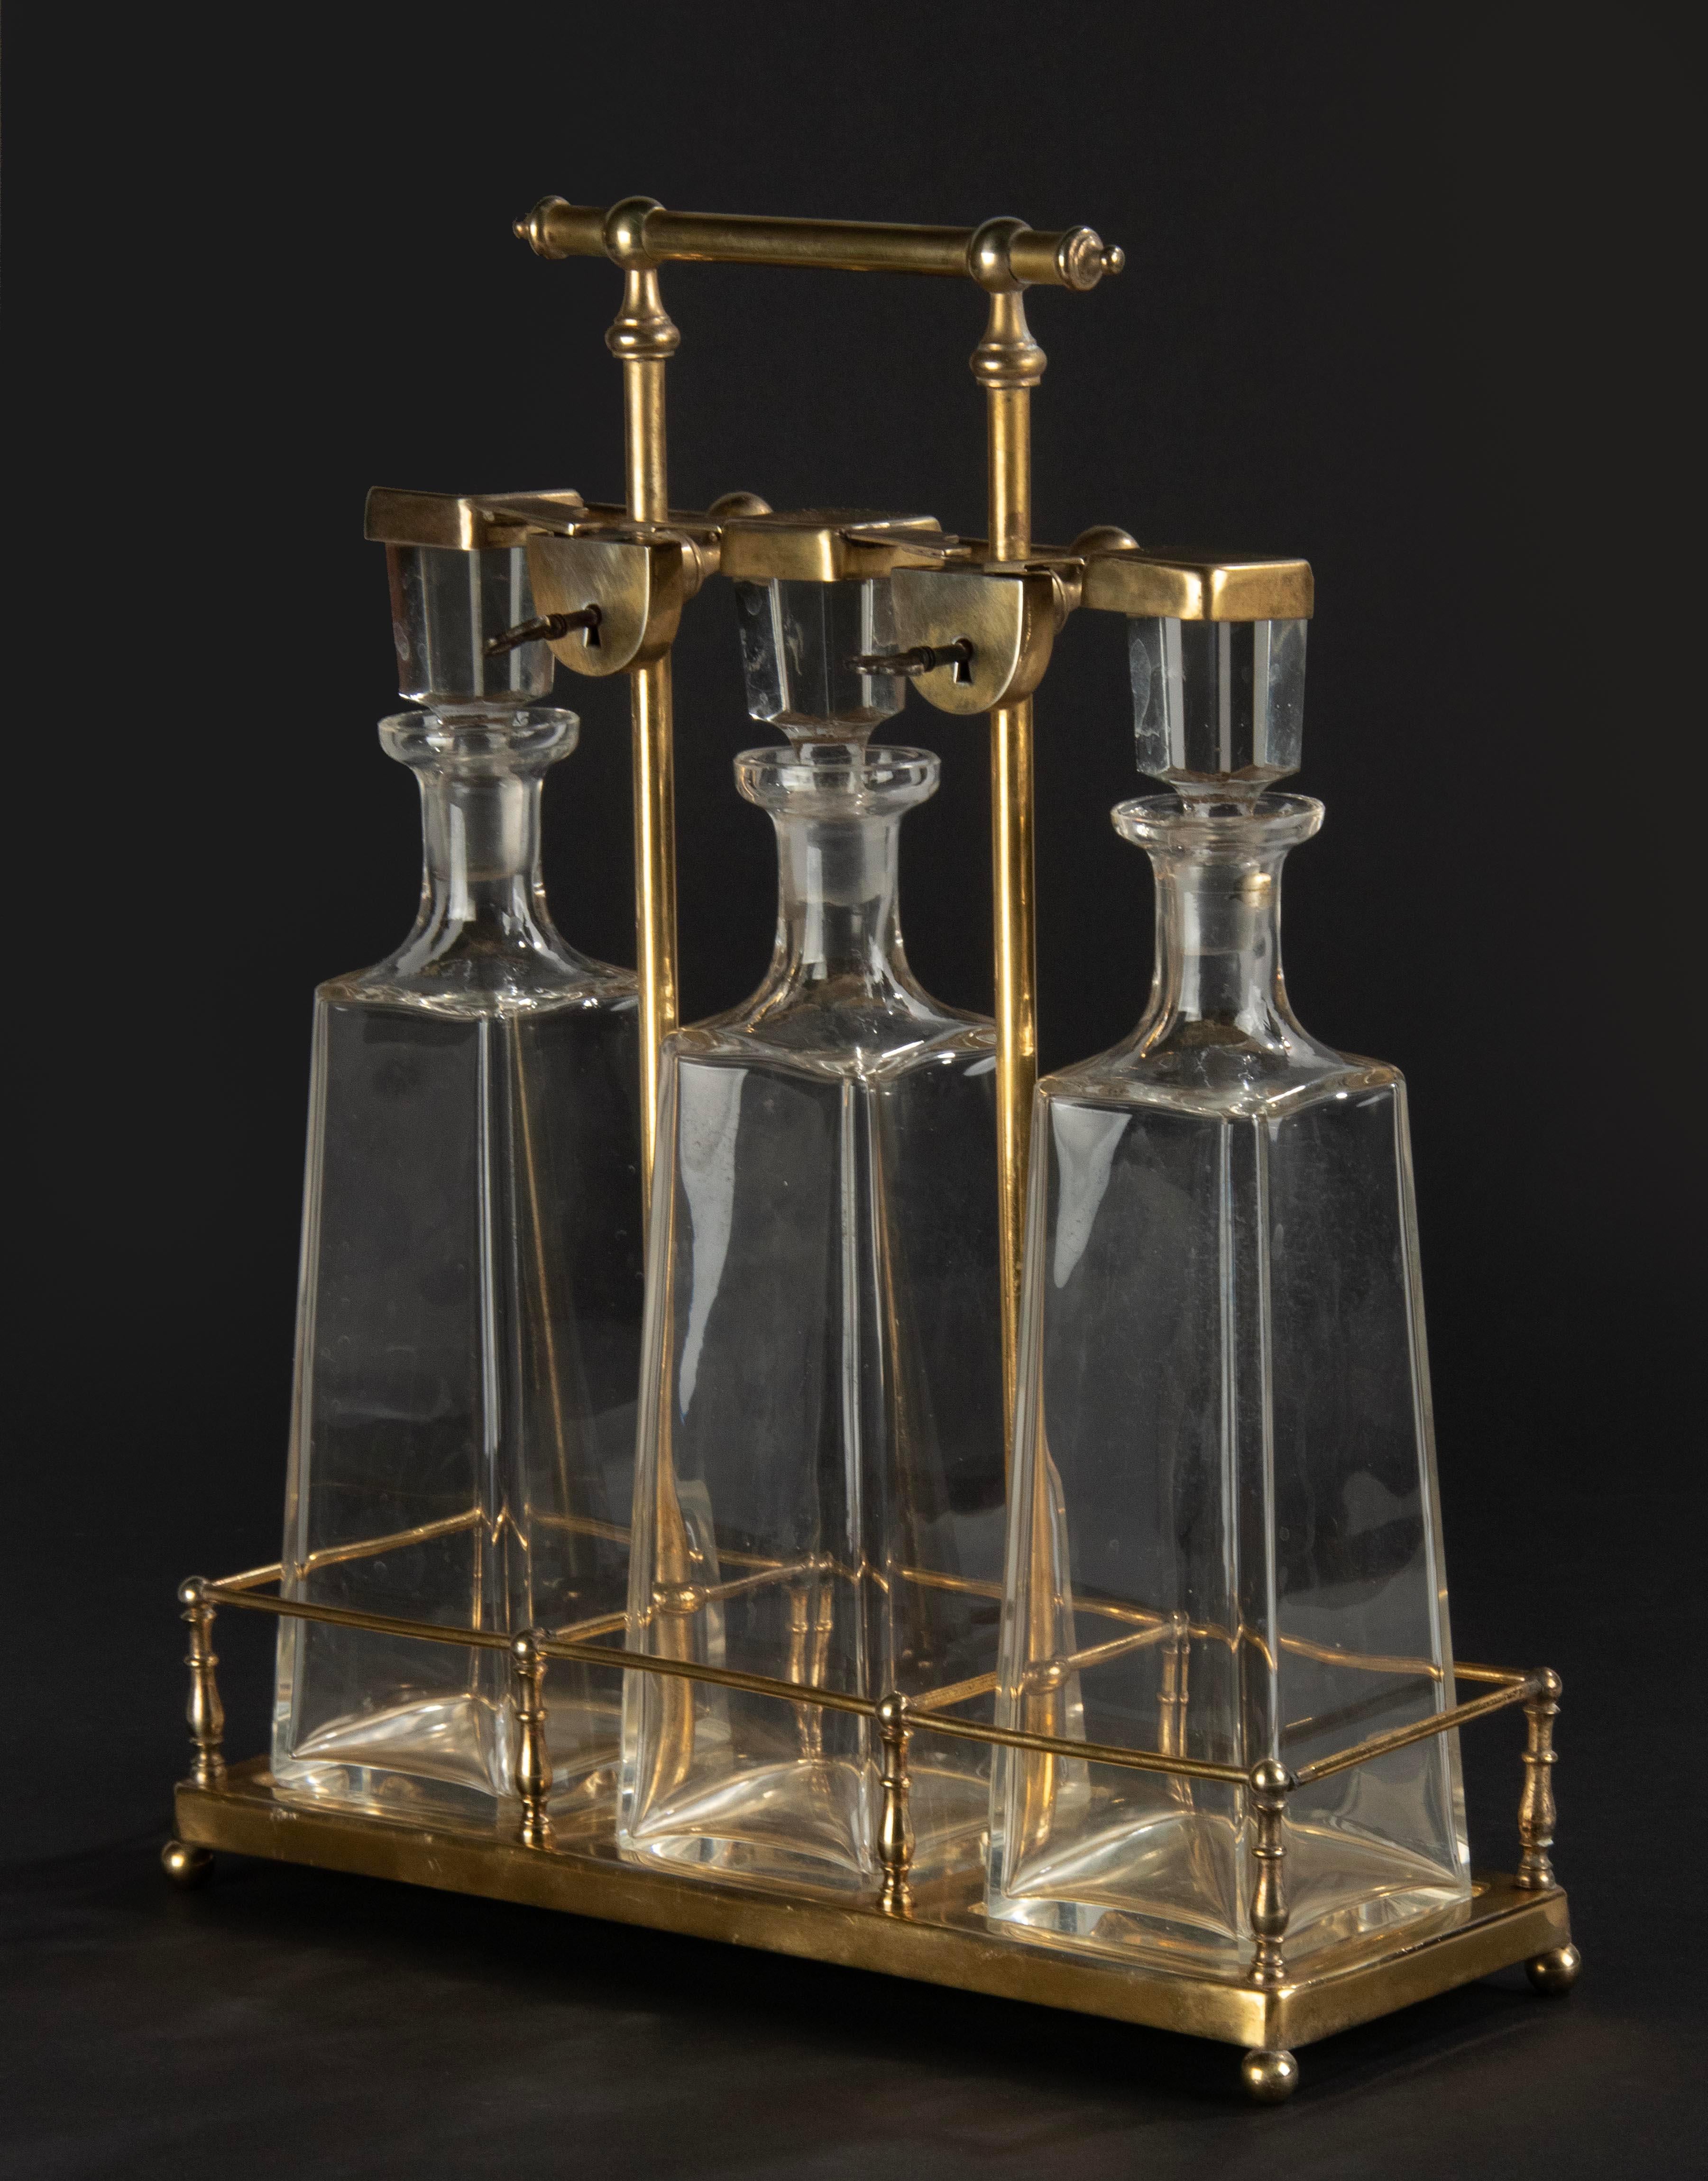 An antique brass colored tantalus rack with three large crystal decanters. The decanters and stoppers are original and antique. The tantalus can be closed with working locks. Made in France around 1880-1890.

Dimension tantalus: 38 (h) x 33 x 12